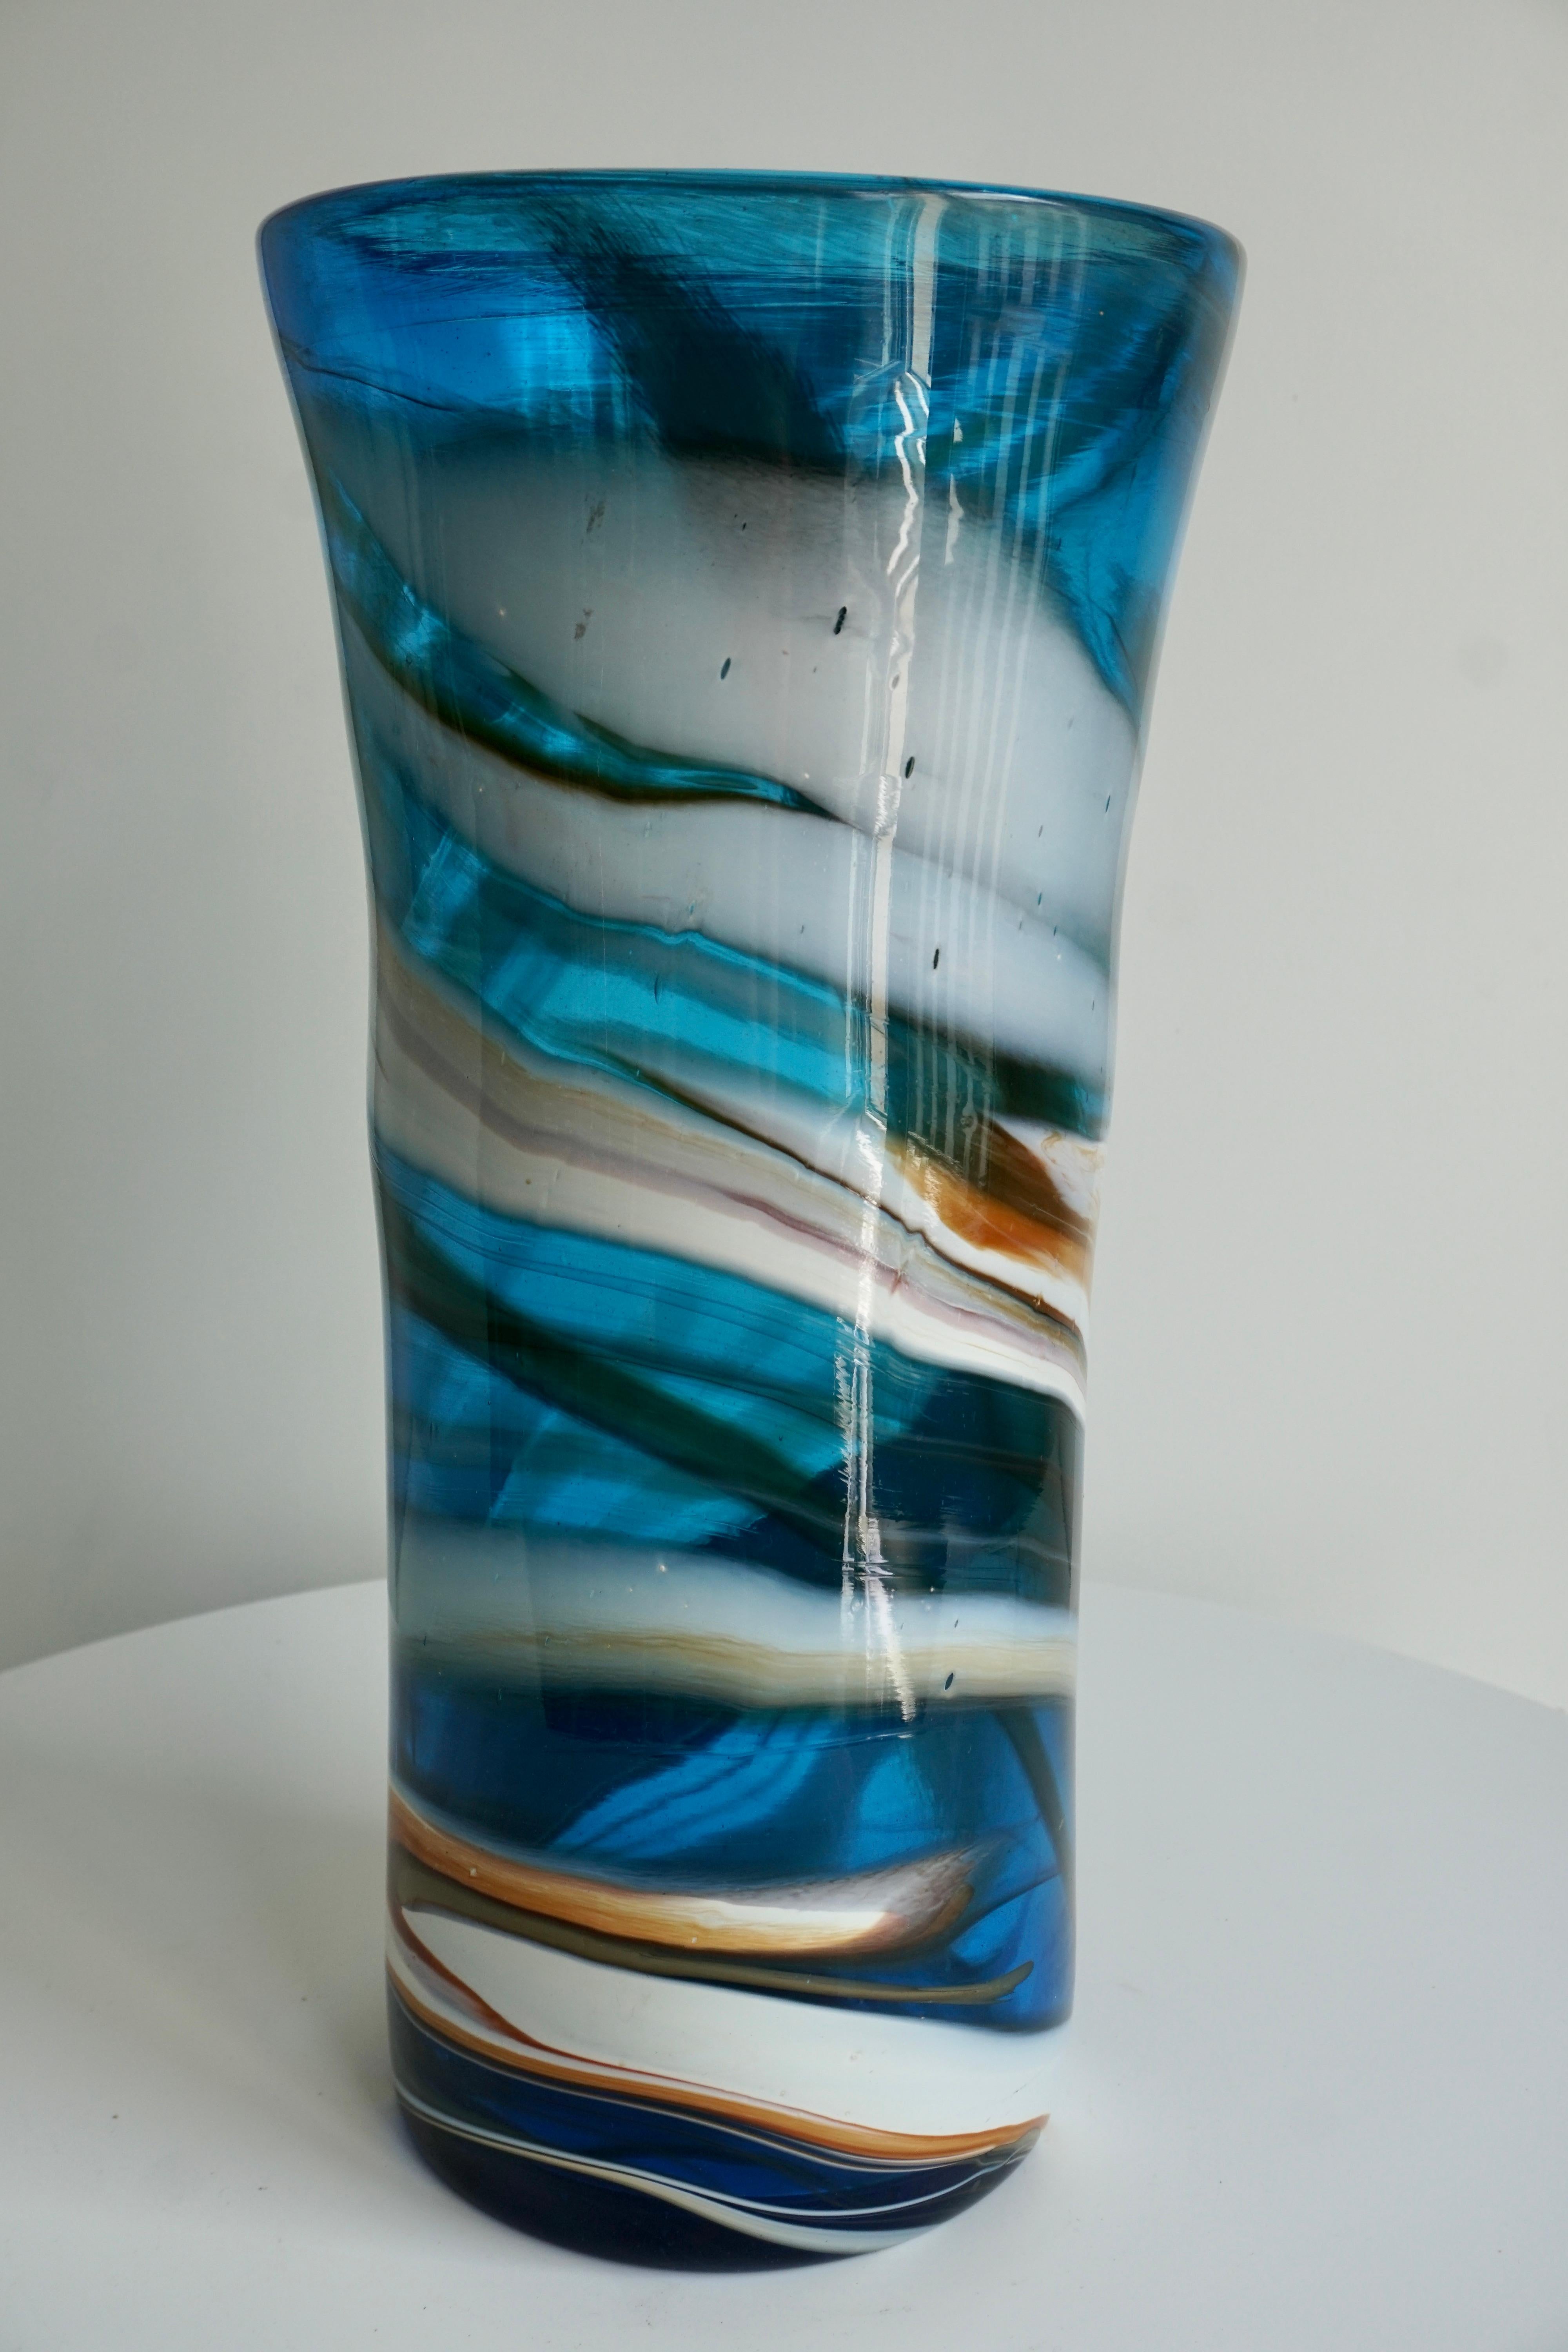 A 20th century vintage Italian large vase in blue with abstract pattern. 
Italy, circa 1970s-1980s. 
A beautiful decorative object.

Height 15.7